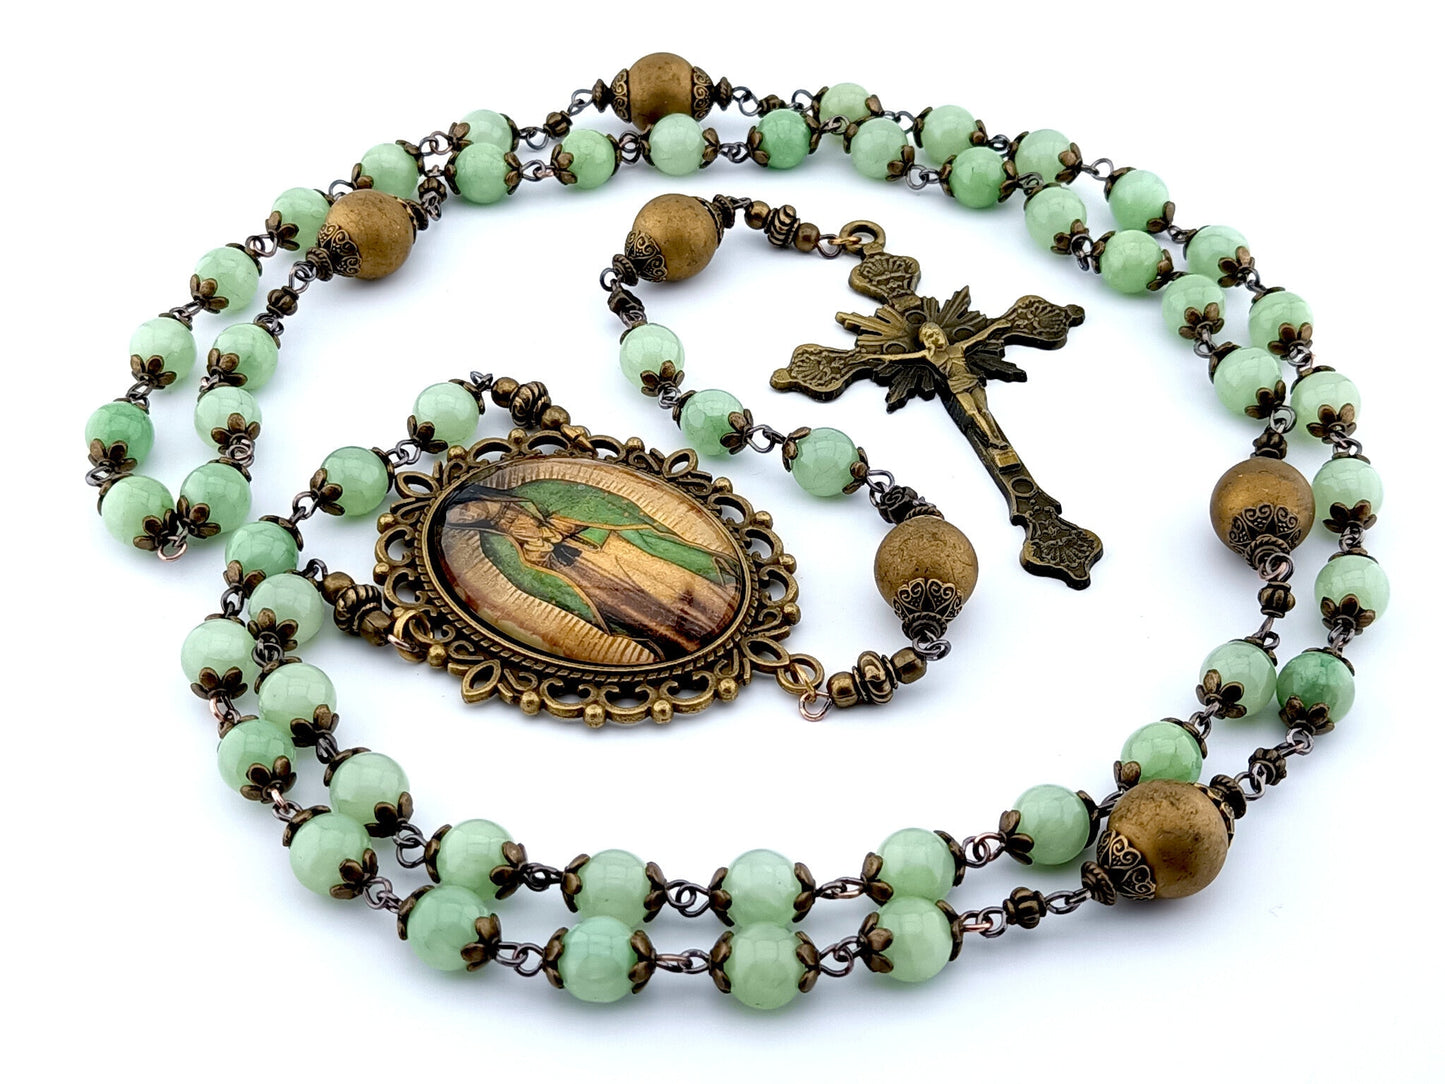 Our Lady of Guadalupe unique rosary beads with jade and gold glass beads, bronze crucifix and centre picture medal and bead caps.